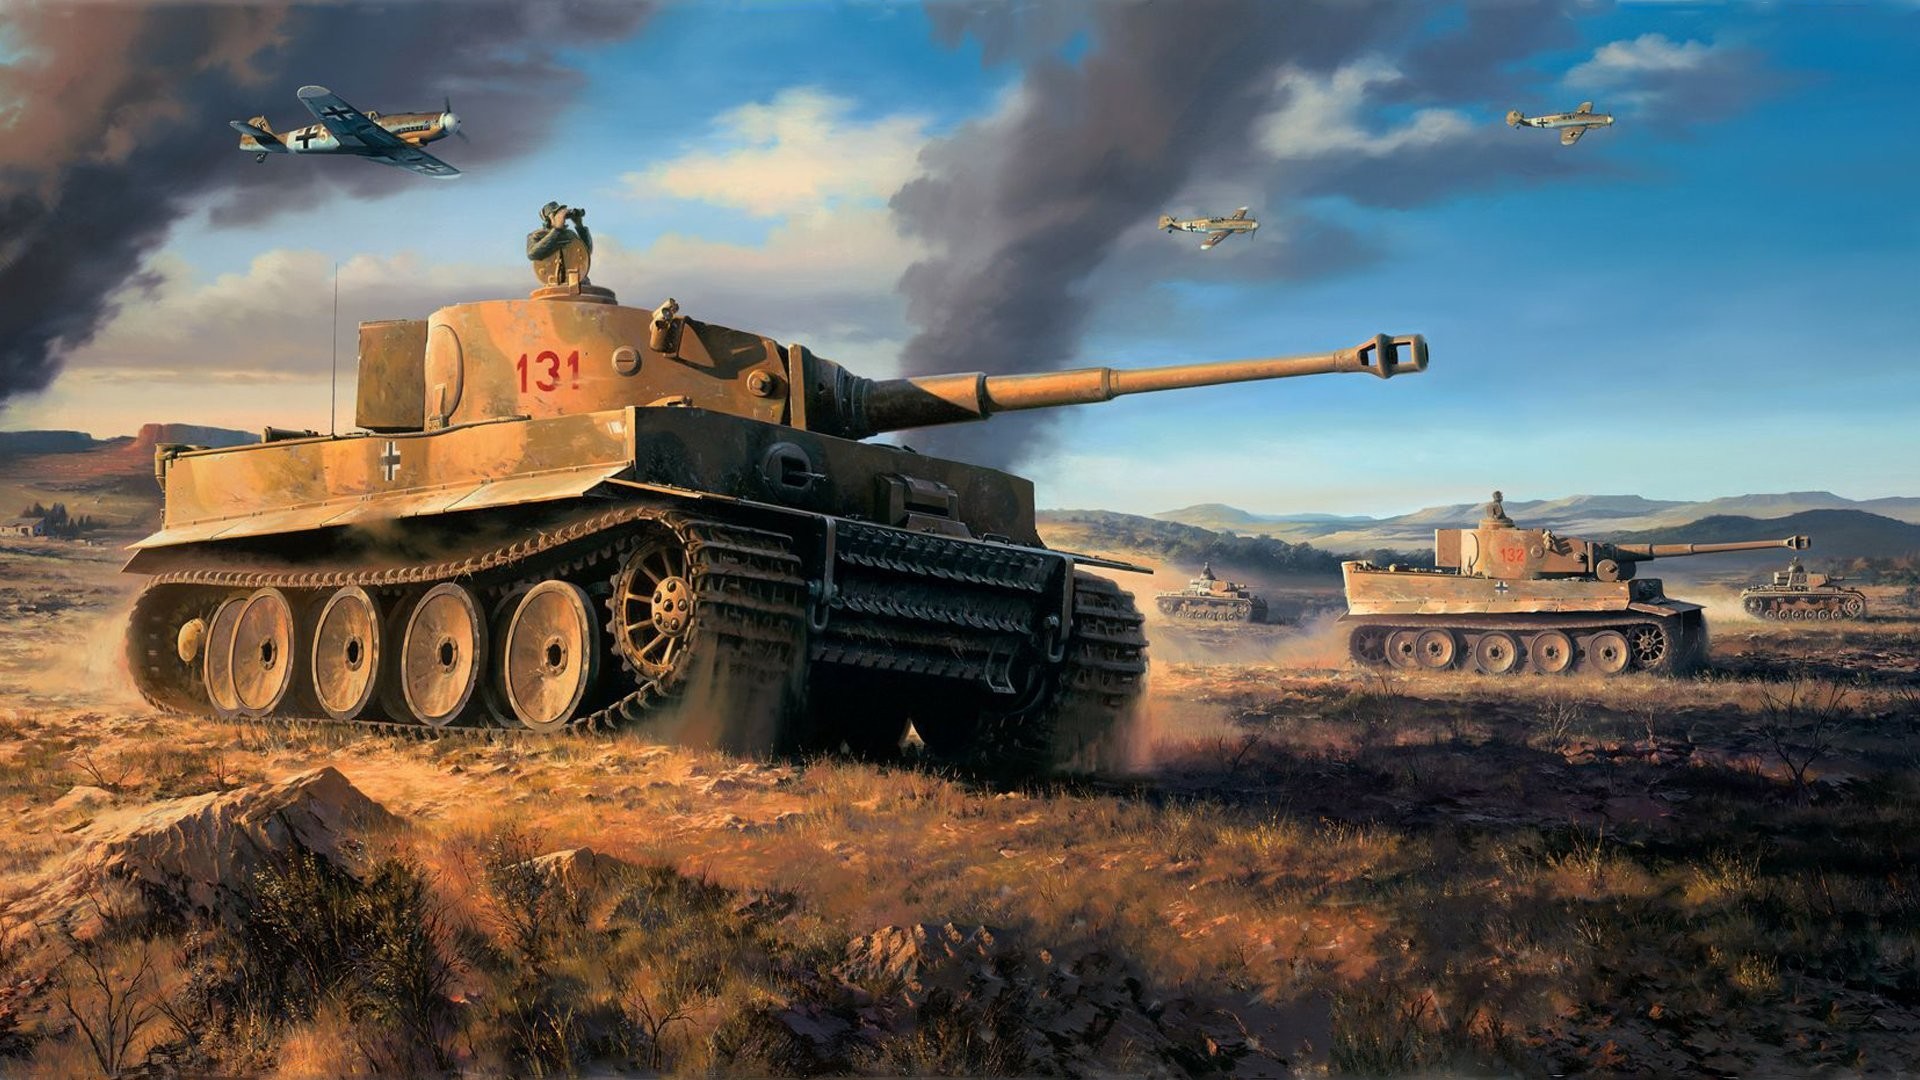 world of tanks wallpaper,combat vehicle,tank,self propelled artillery,pc game,strategy video game